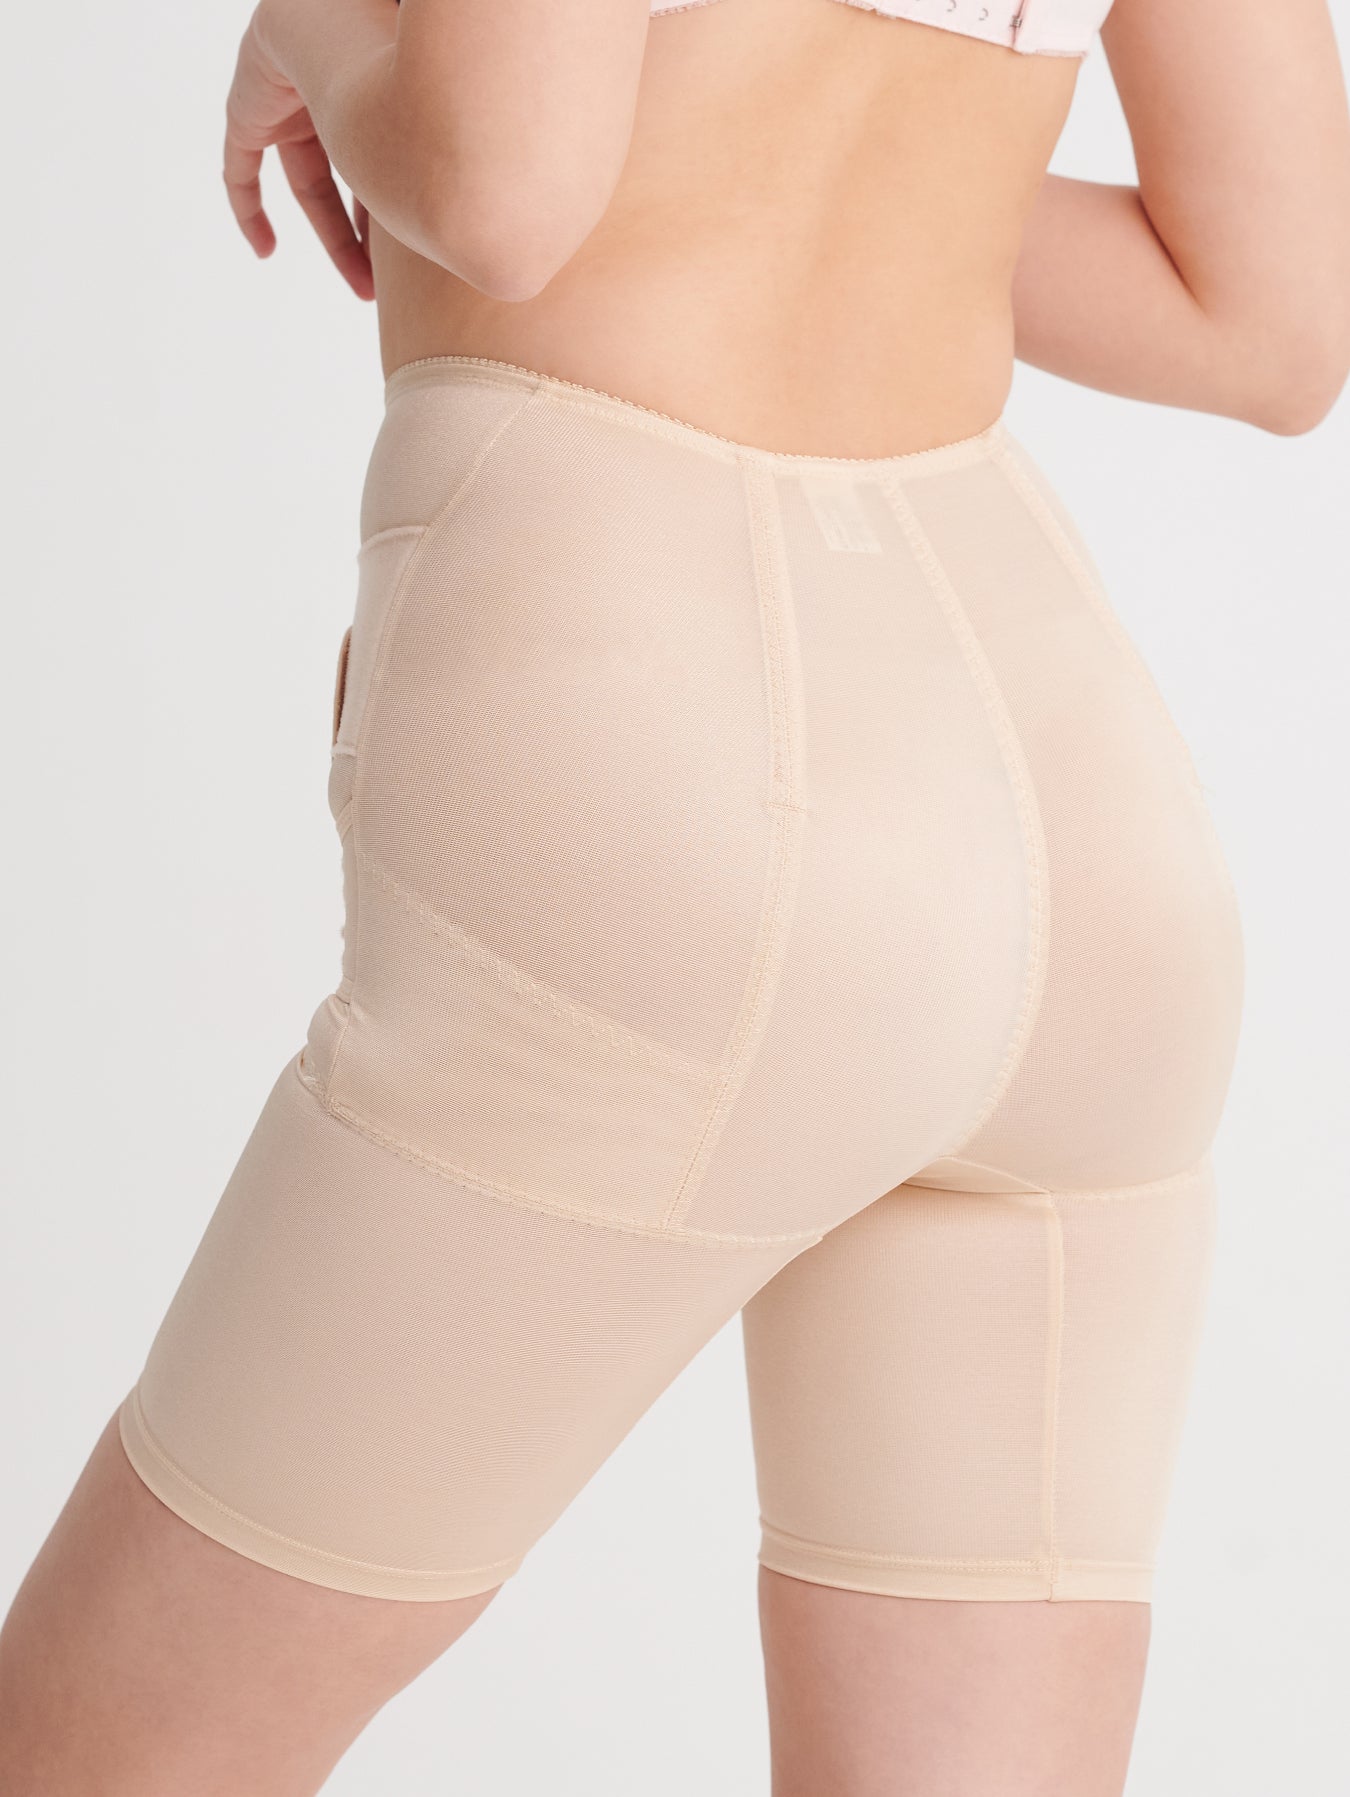 Postpartum Body Shaping Support Pants Step 3 – Bmama Maternity